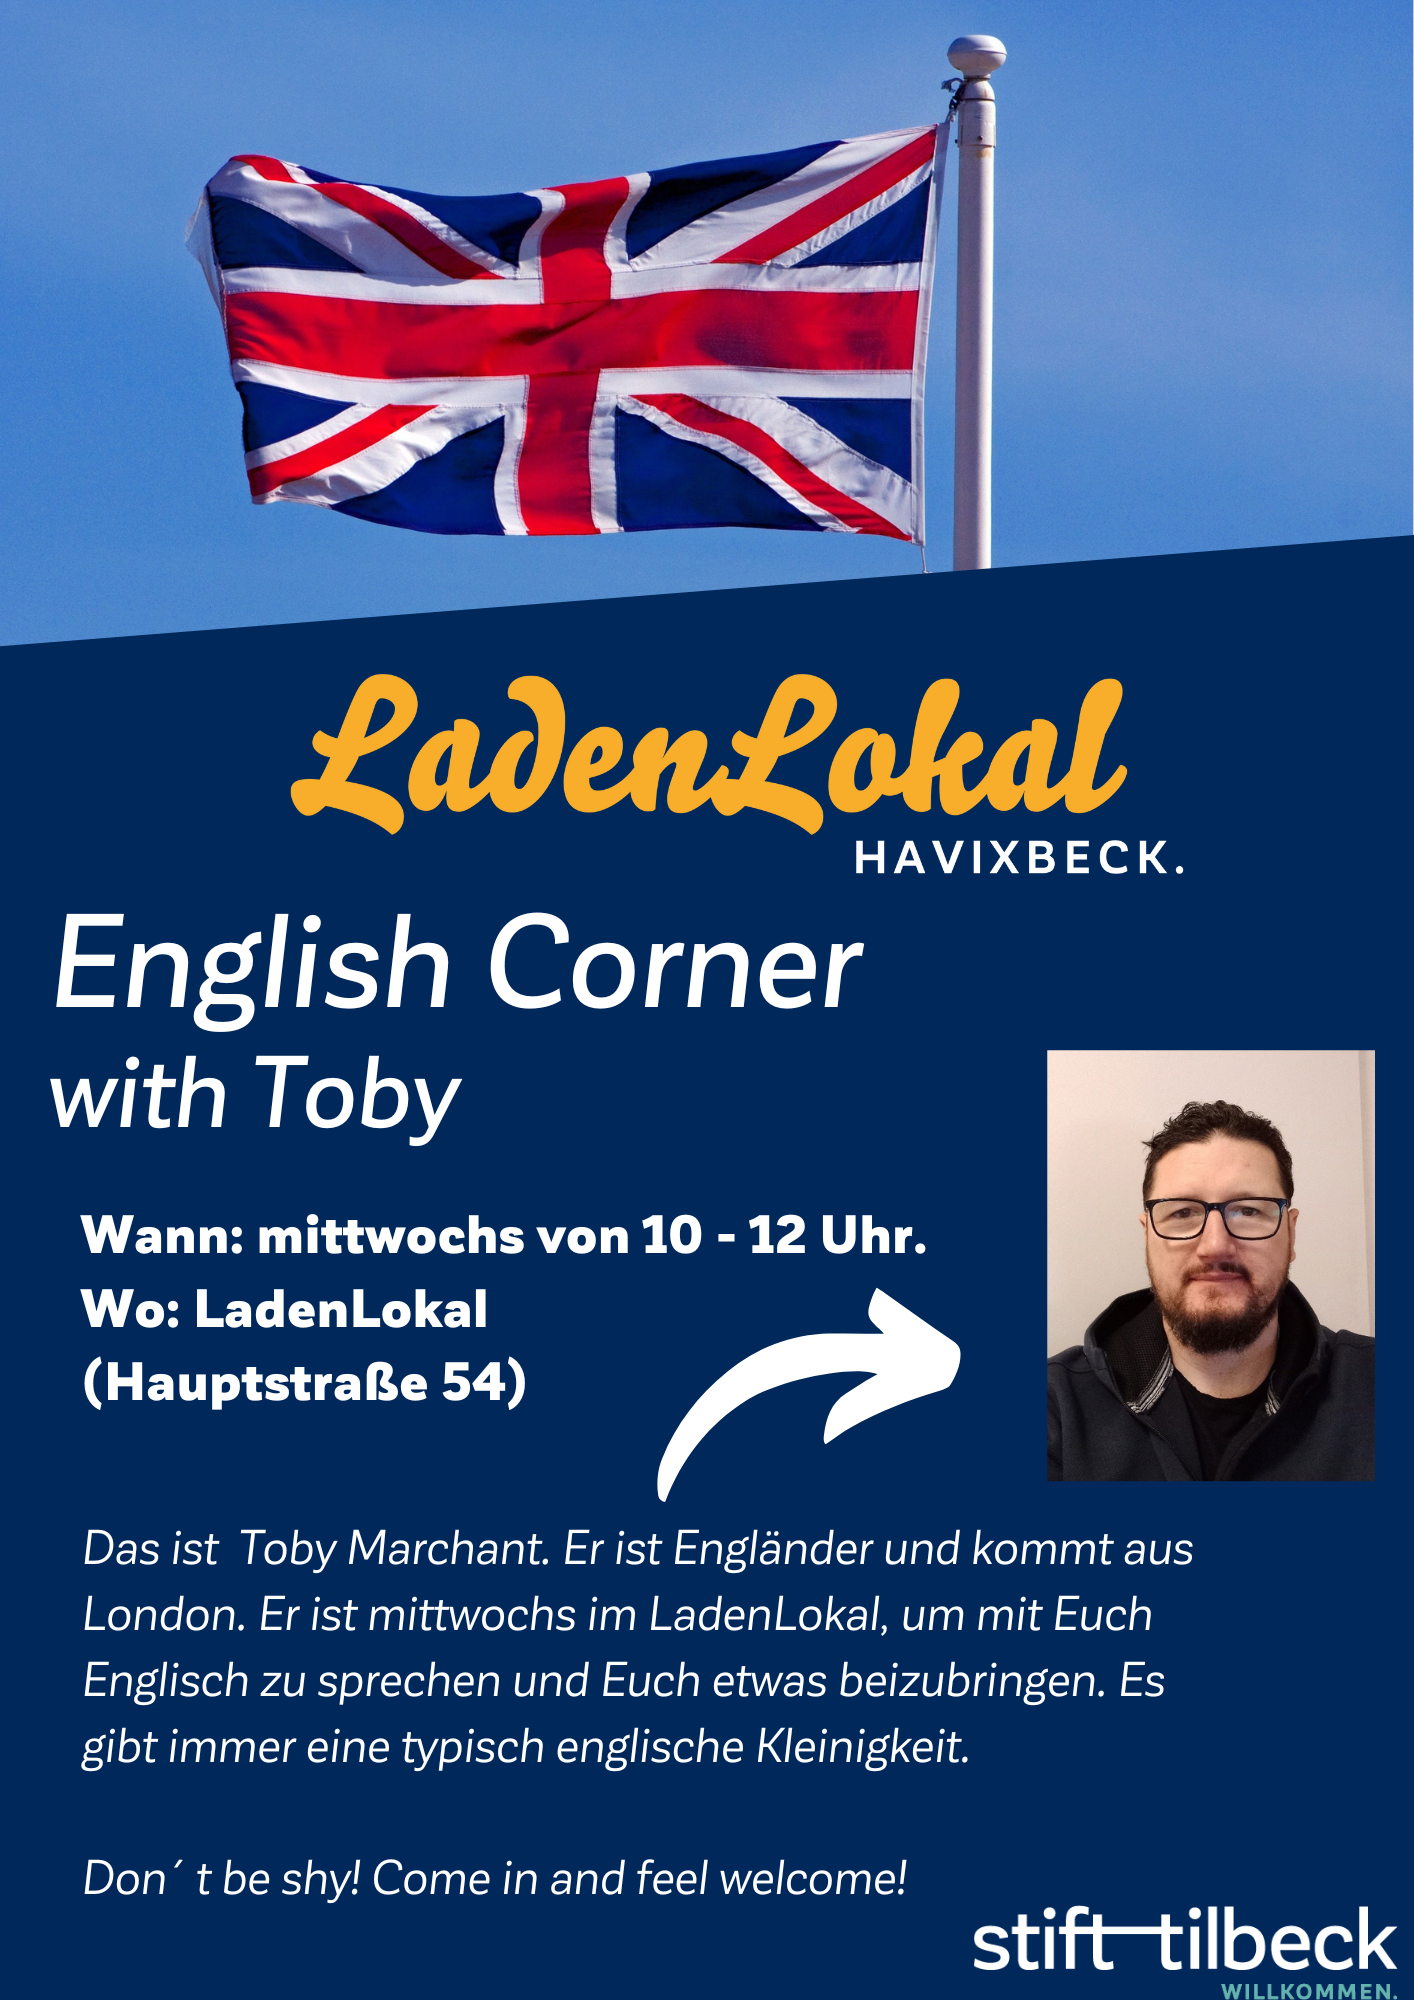 English Corner with Toby